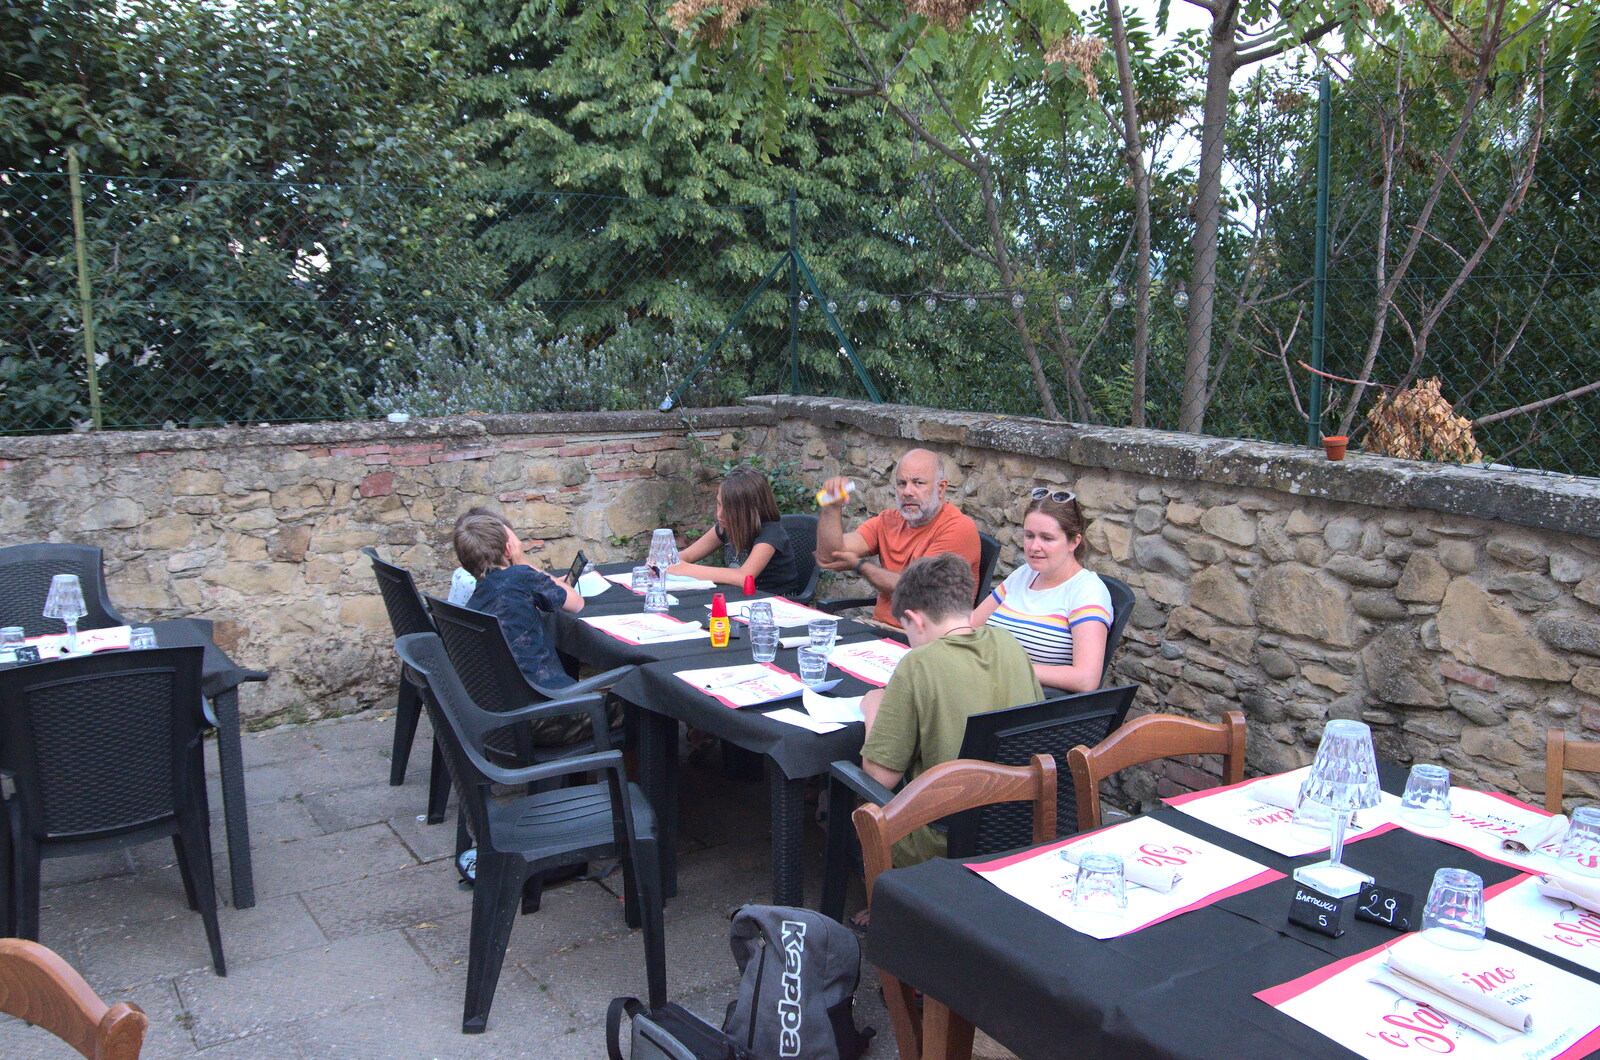 A Day by the Pool and a Festival Rehearsal, Arezzo, Italy - 3rd September 2022: Dinner in the pizzeria's garden area